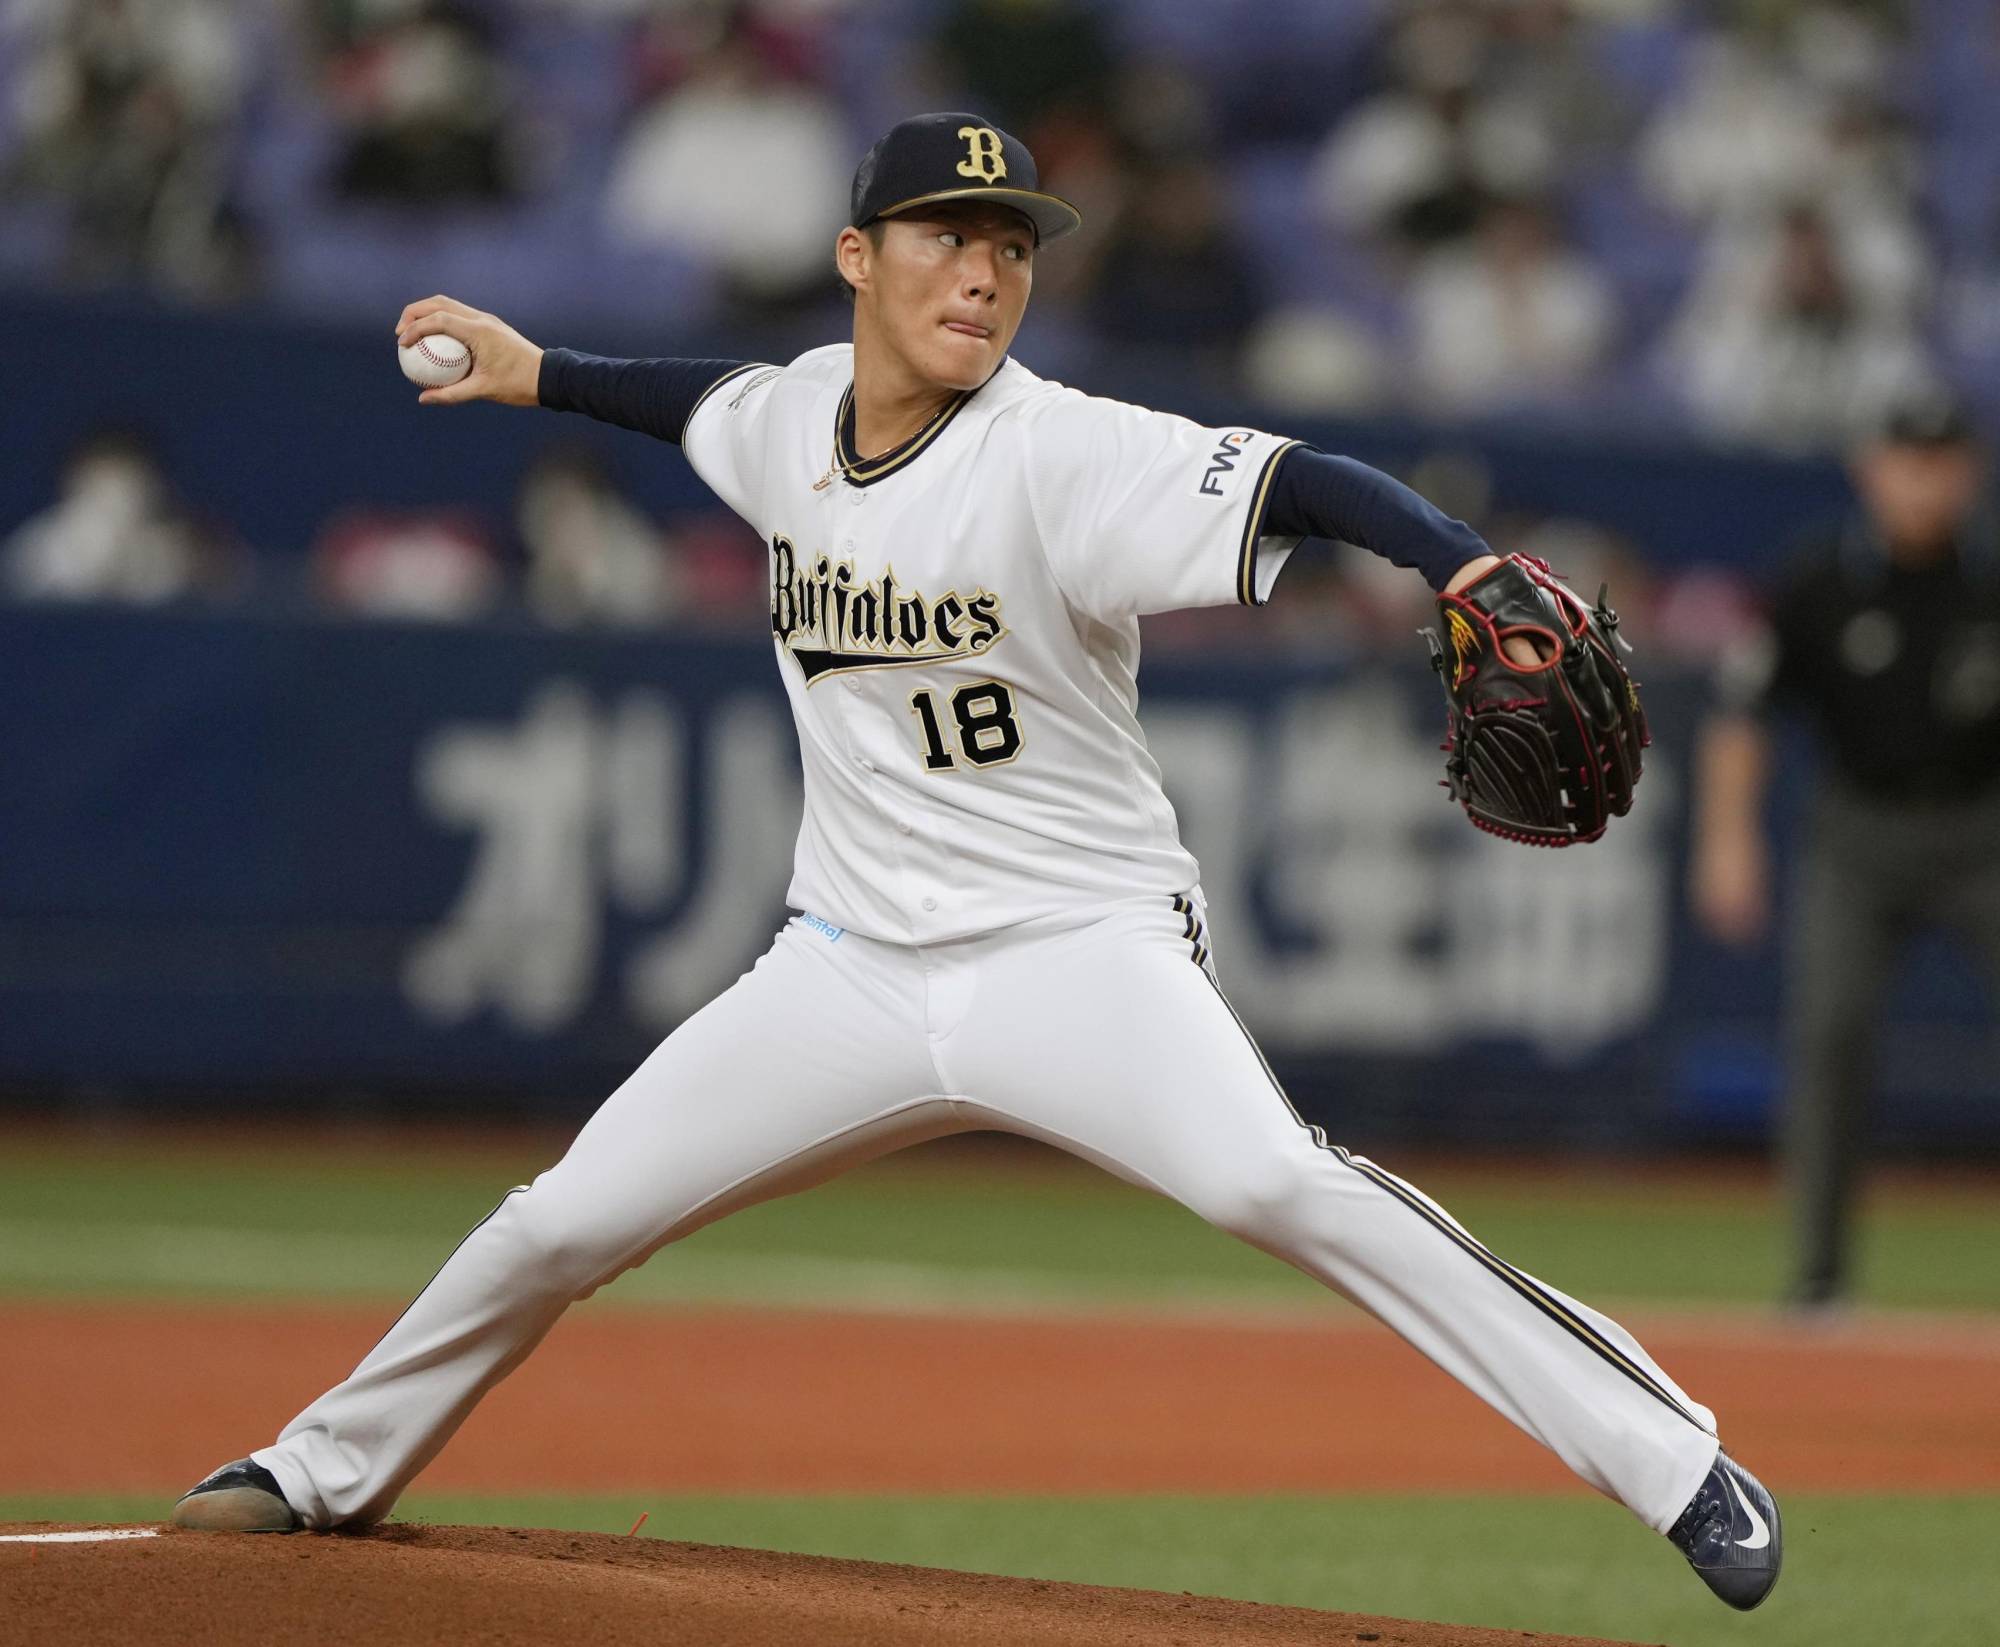 NPB draft offers no certainties for teams trying to find new stars